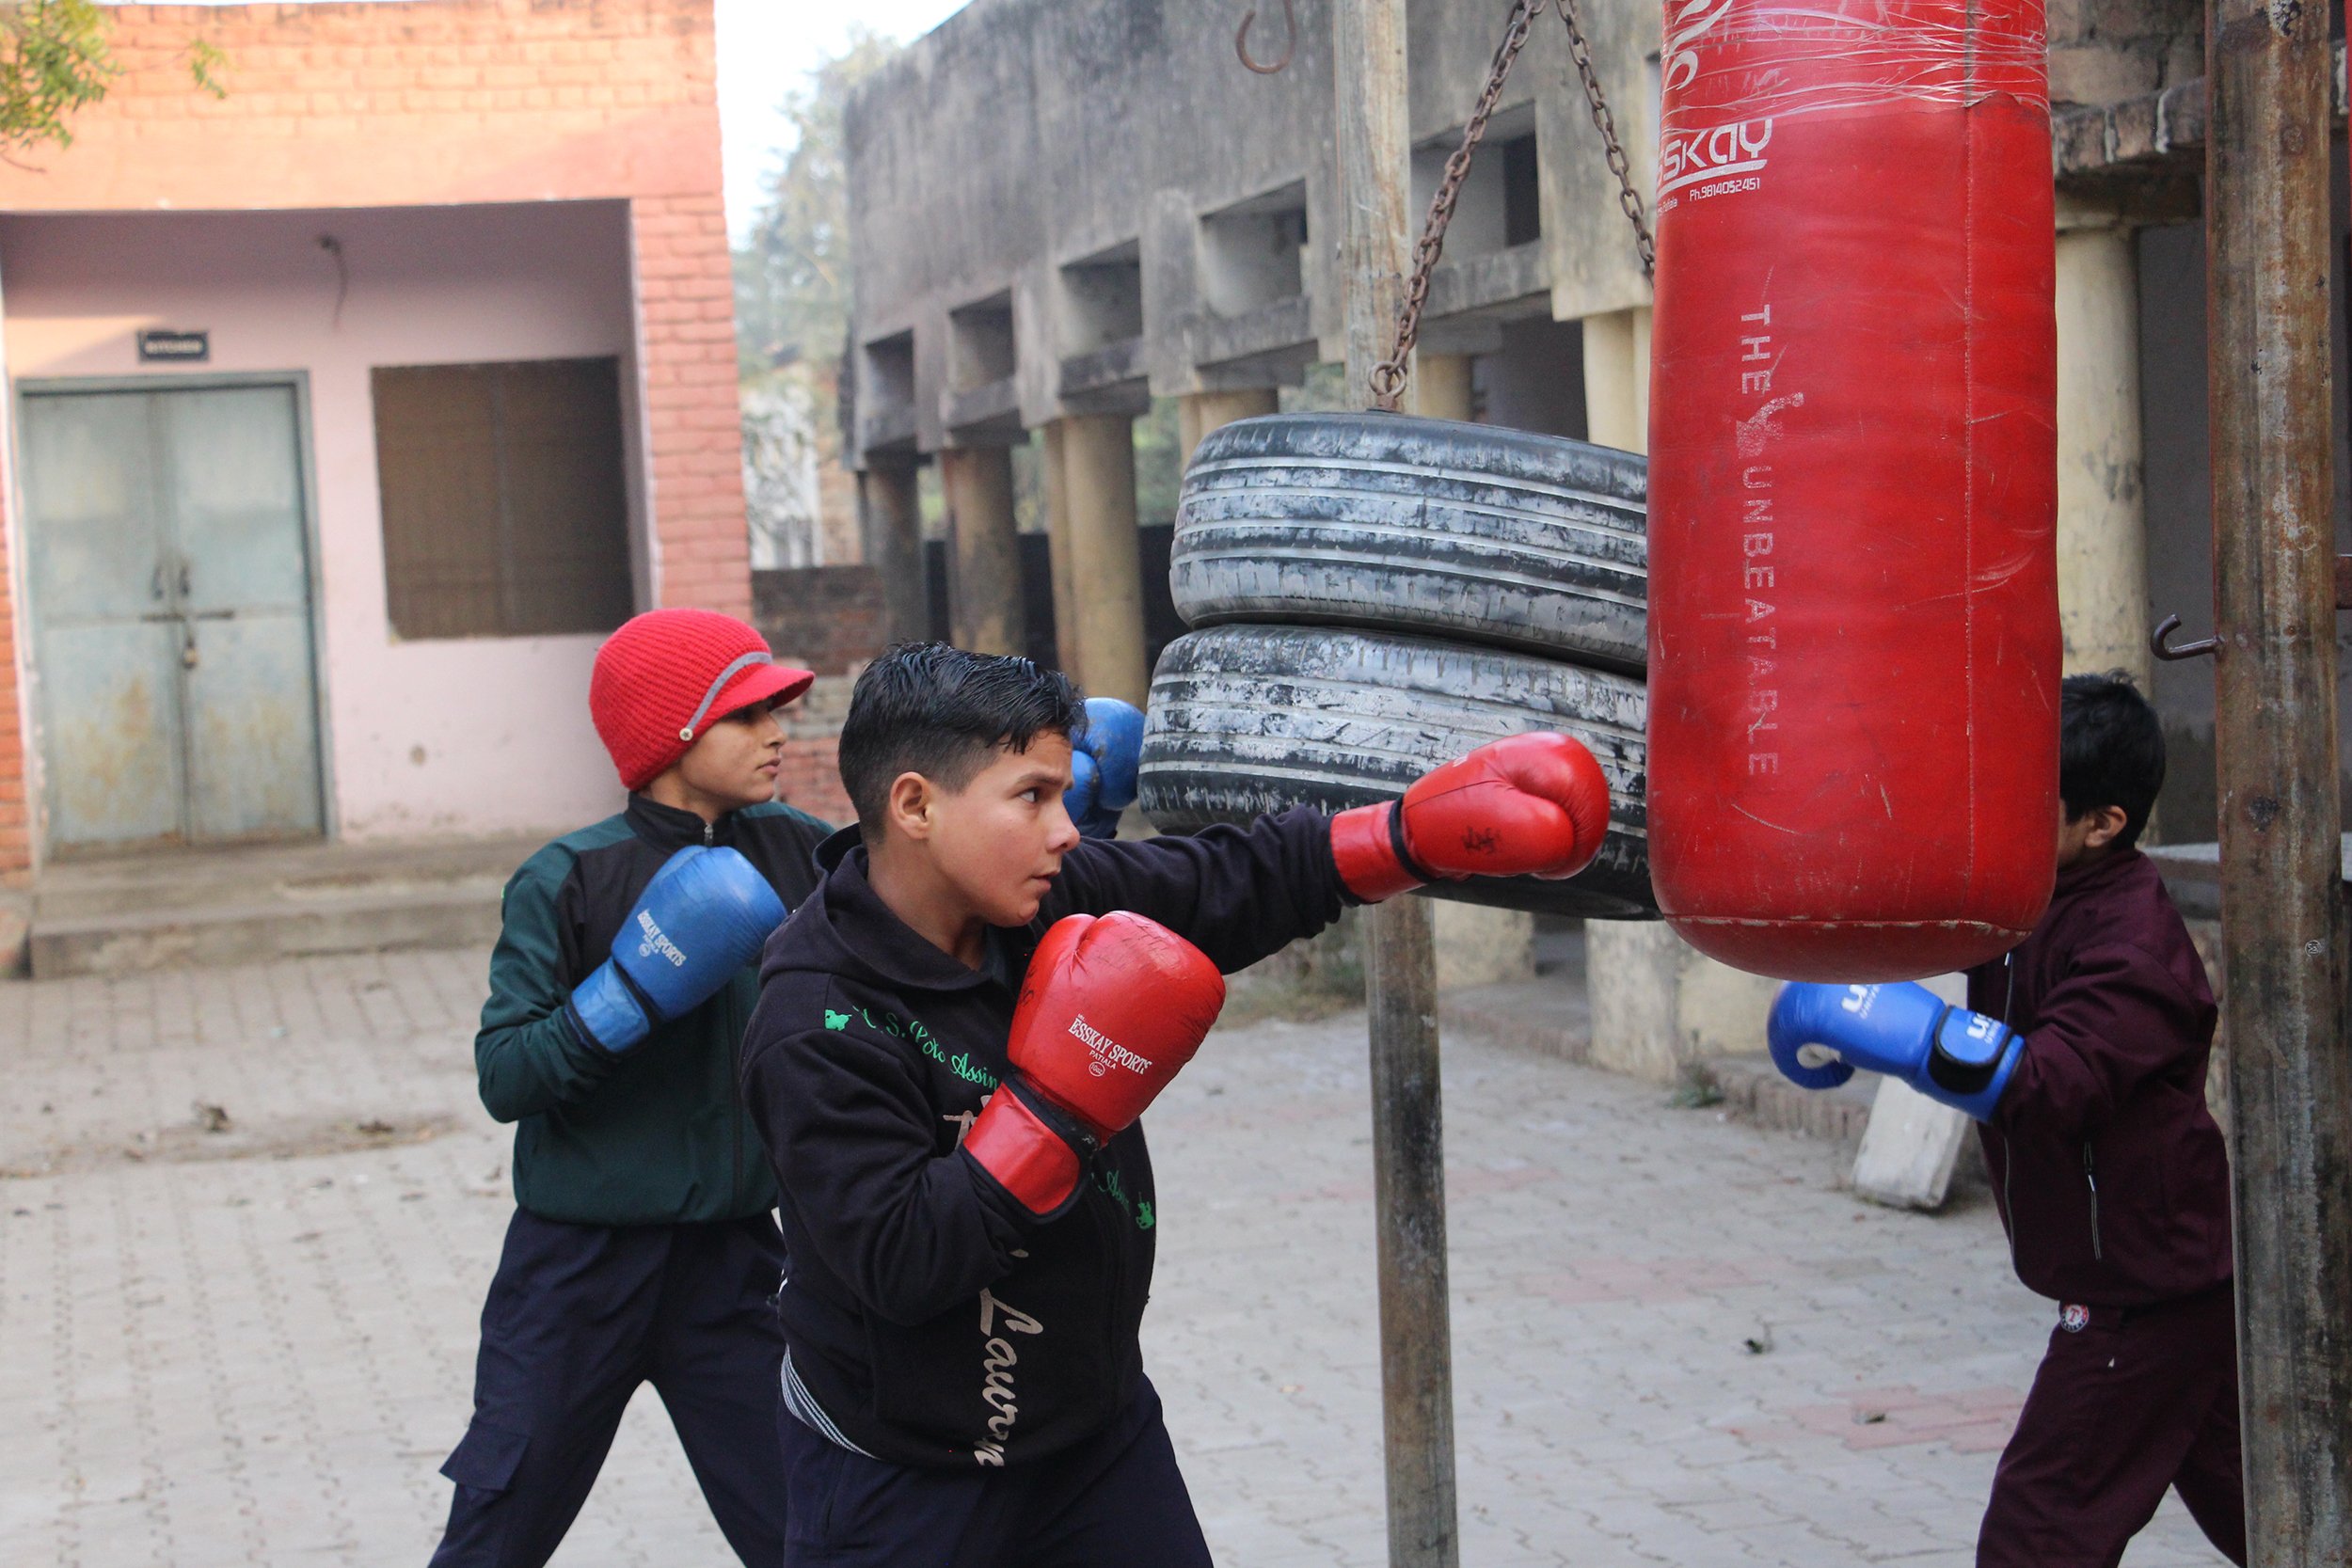  Anjali, 15, warms up on a punching bag before afternoon practice. Punching bags and old tires are used for training and are hung up in the courtyard of Harsola’s government school. | Photo by Emma Lovell 